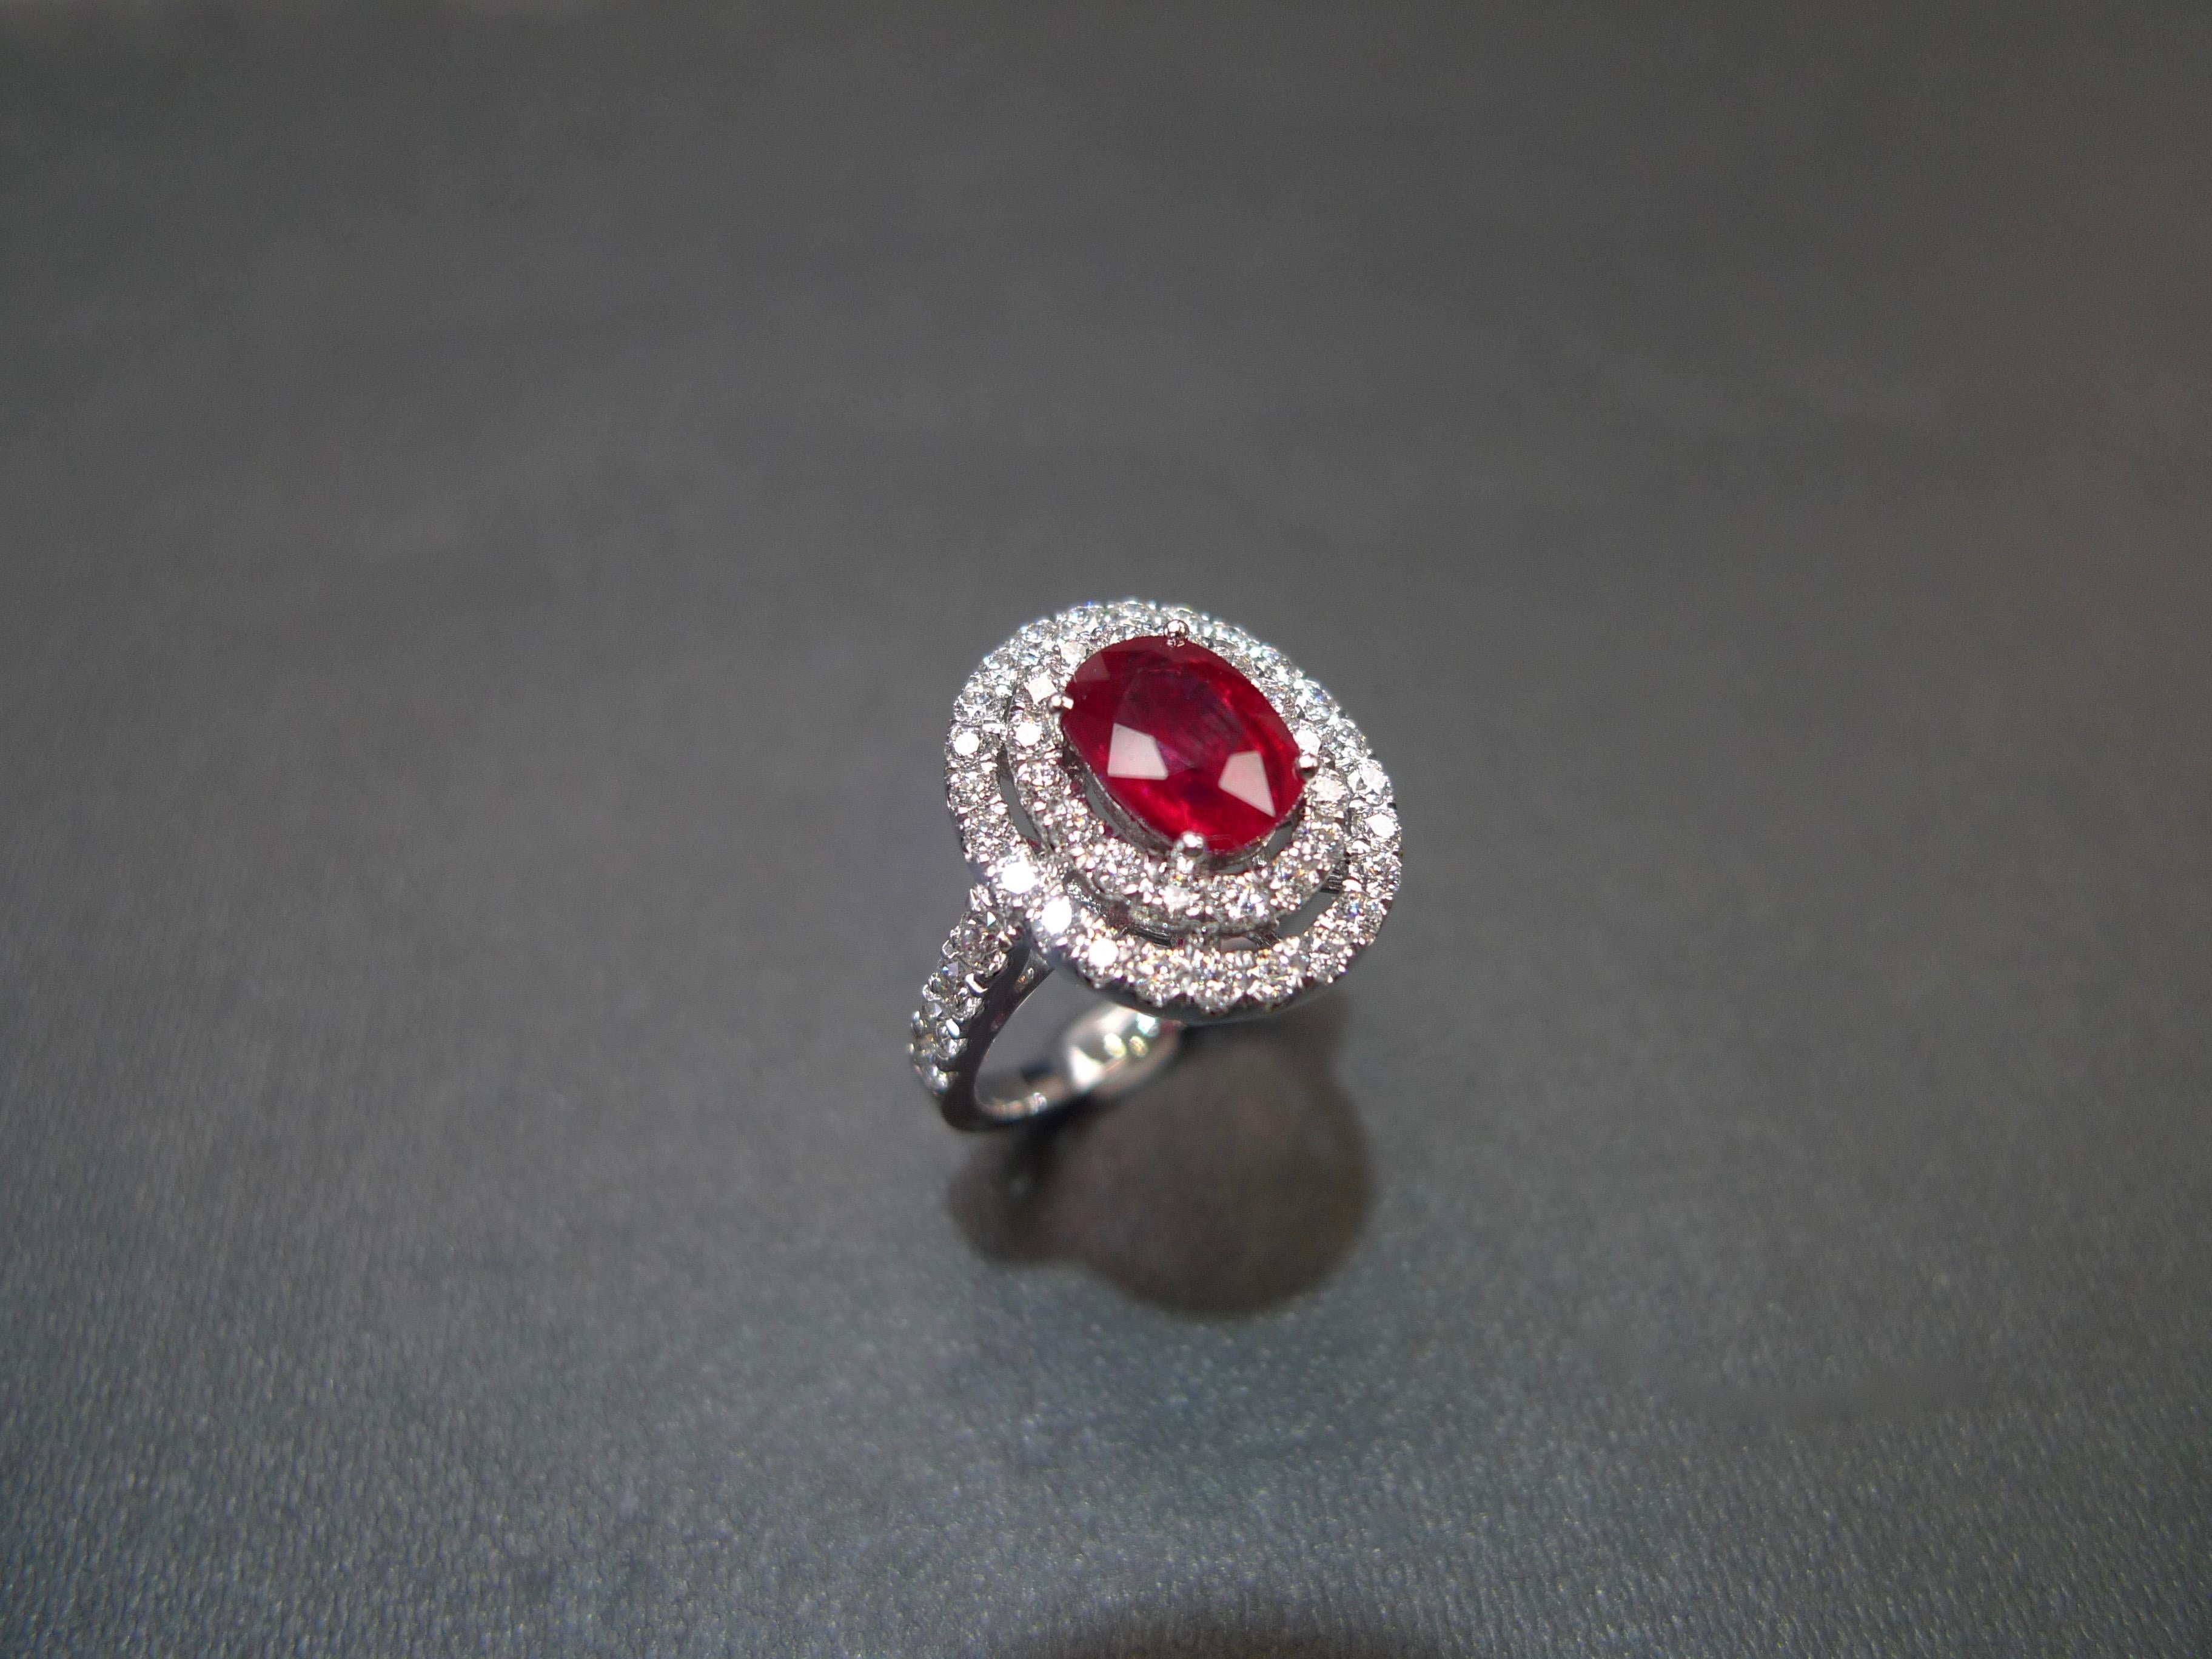 Oval Cut GIA Certificated 2.03 Carat Ruby Vivid Red Pigeon Blood Burma and Diamond Ring For Sale